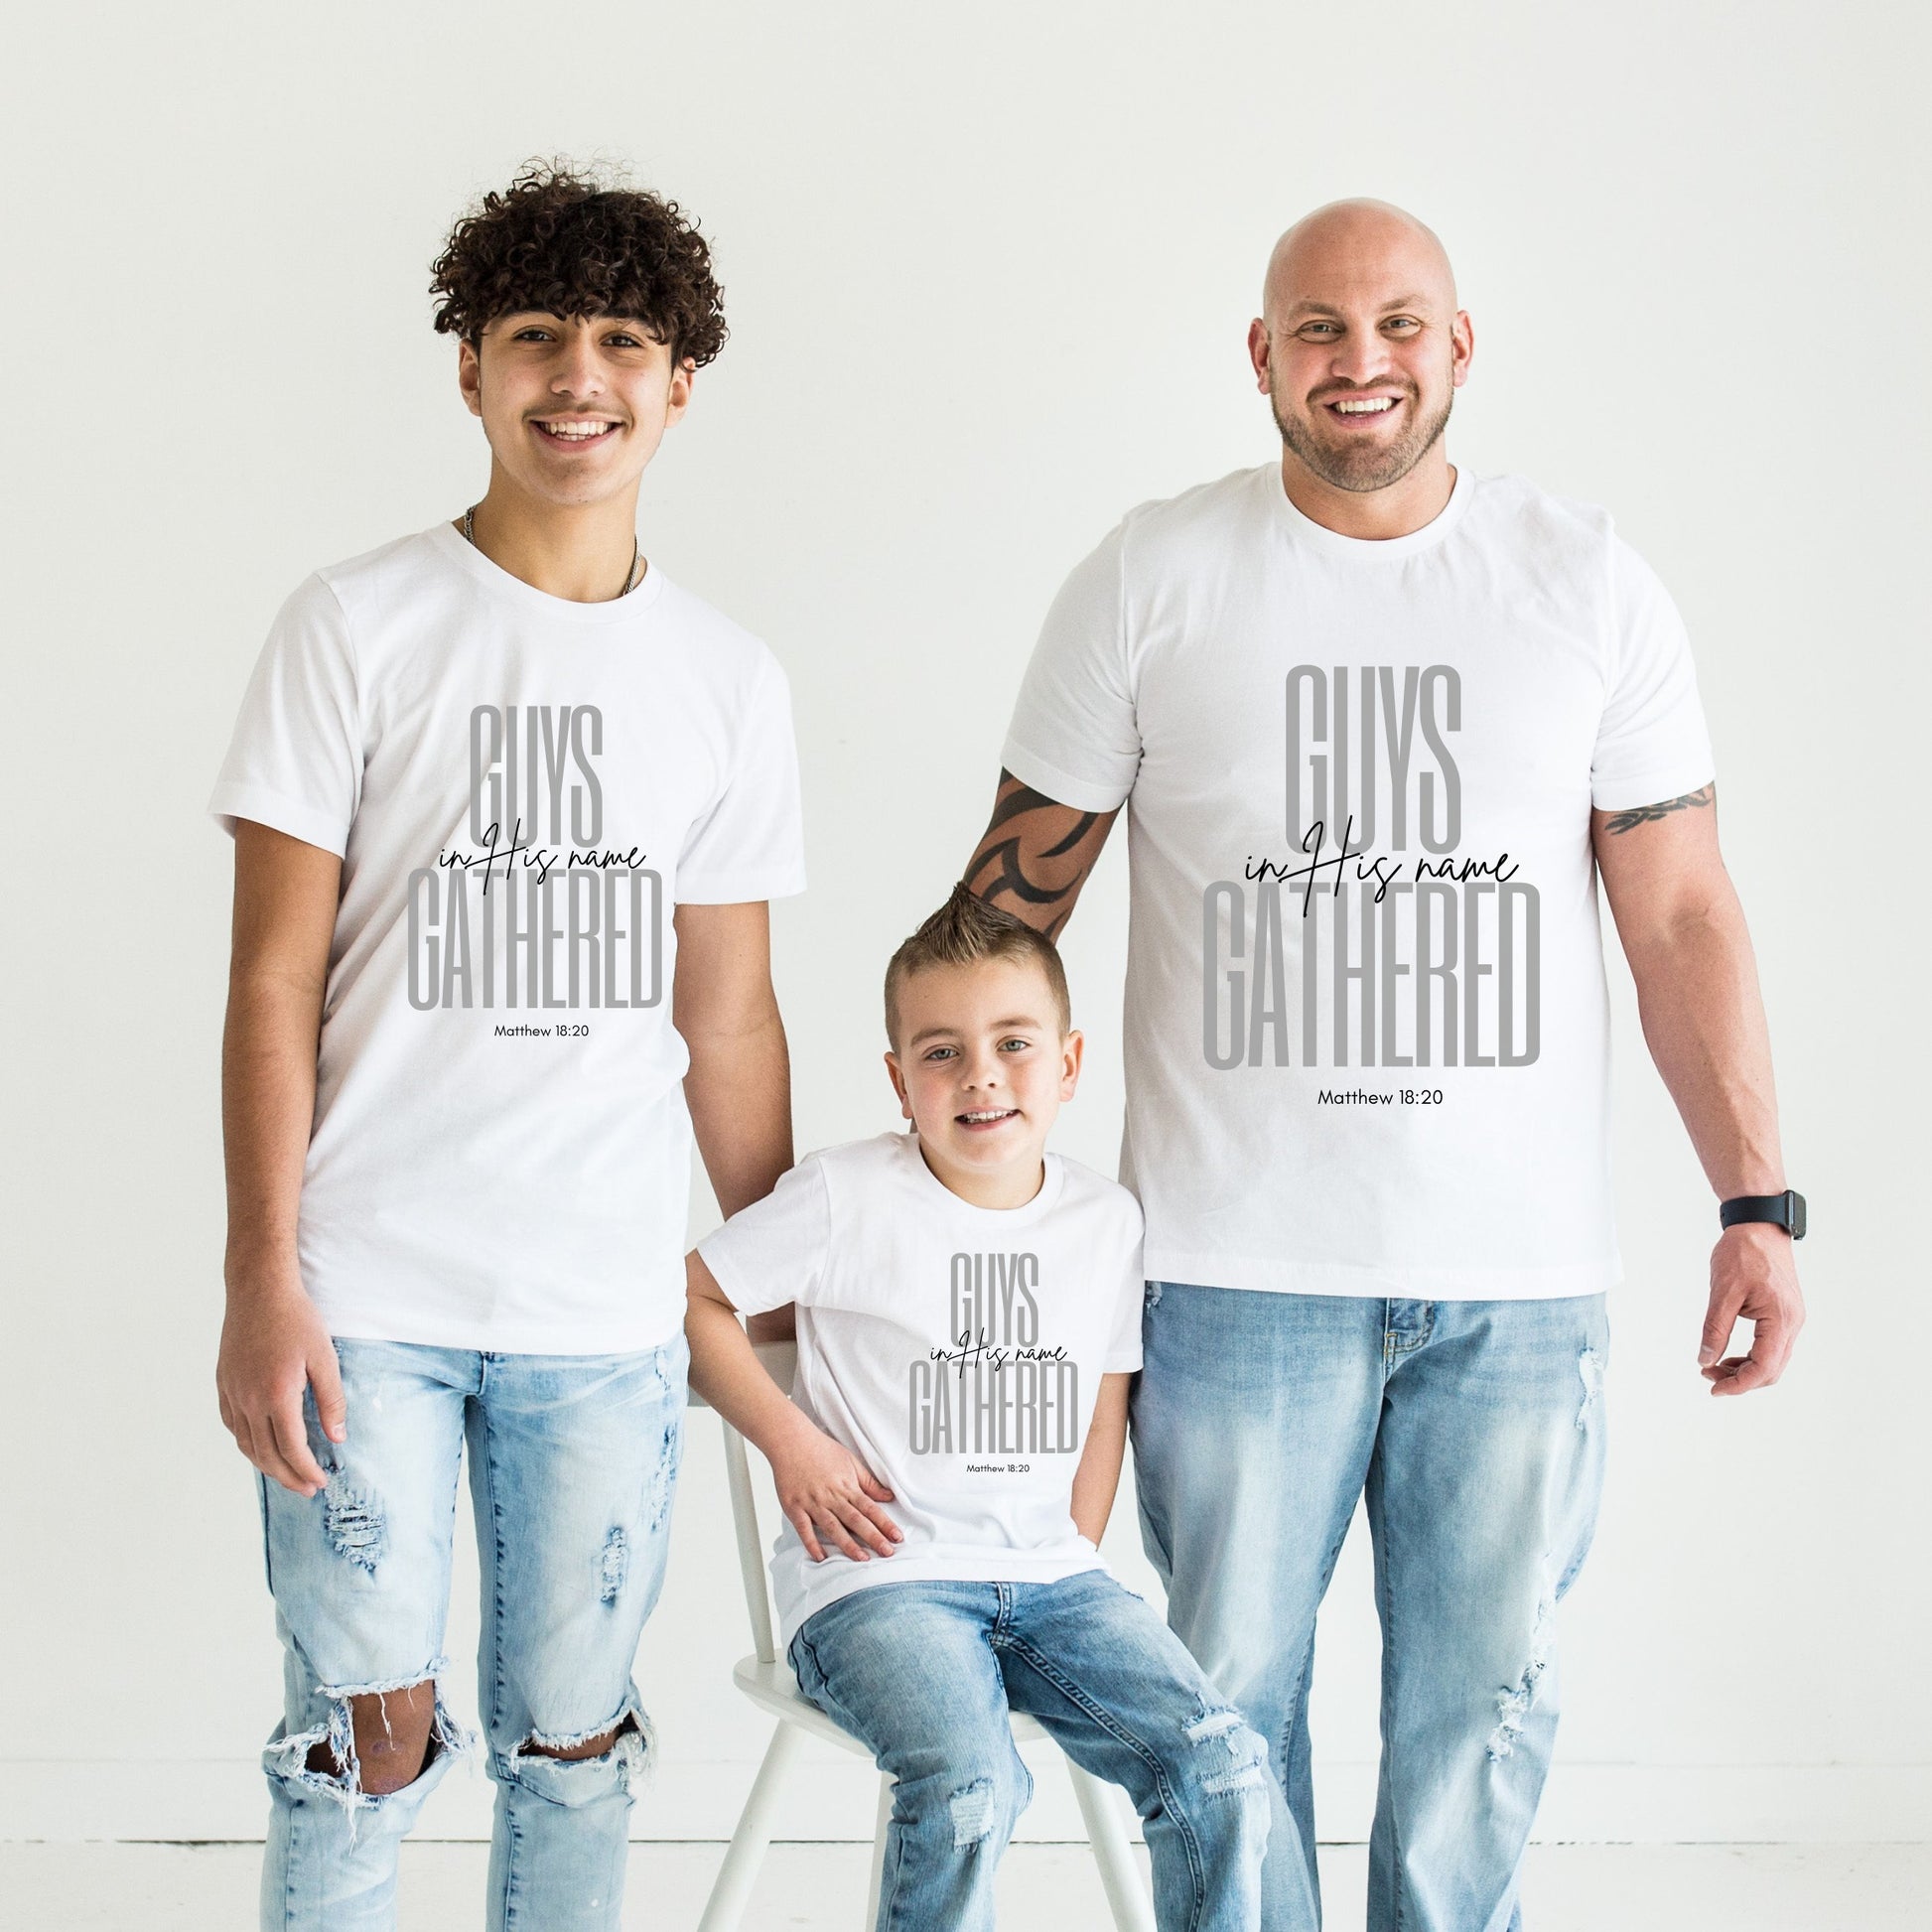 A small Life Group for kids leader and two boy members wearing matching t-shirts.